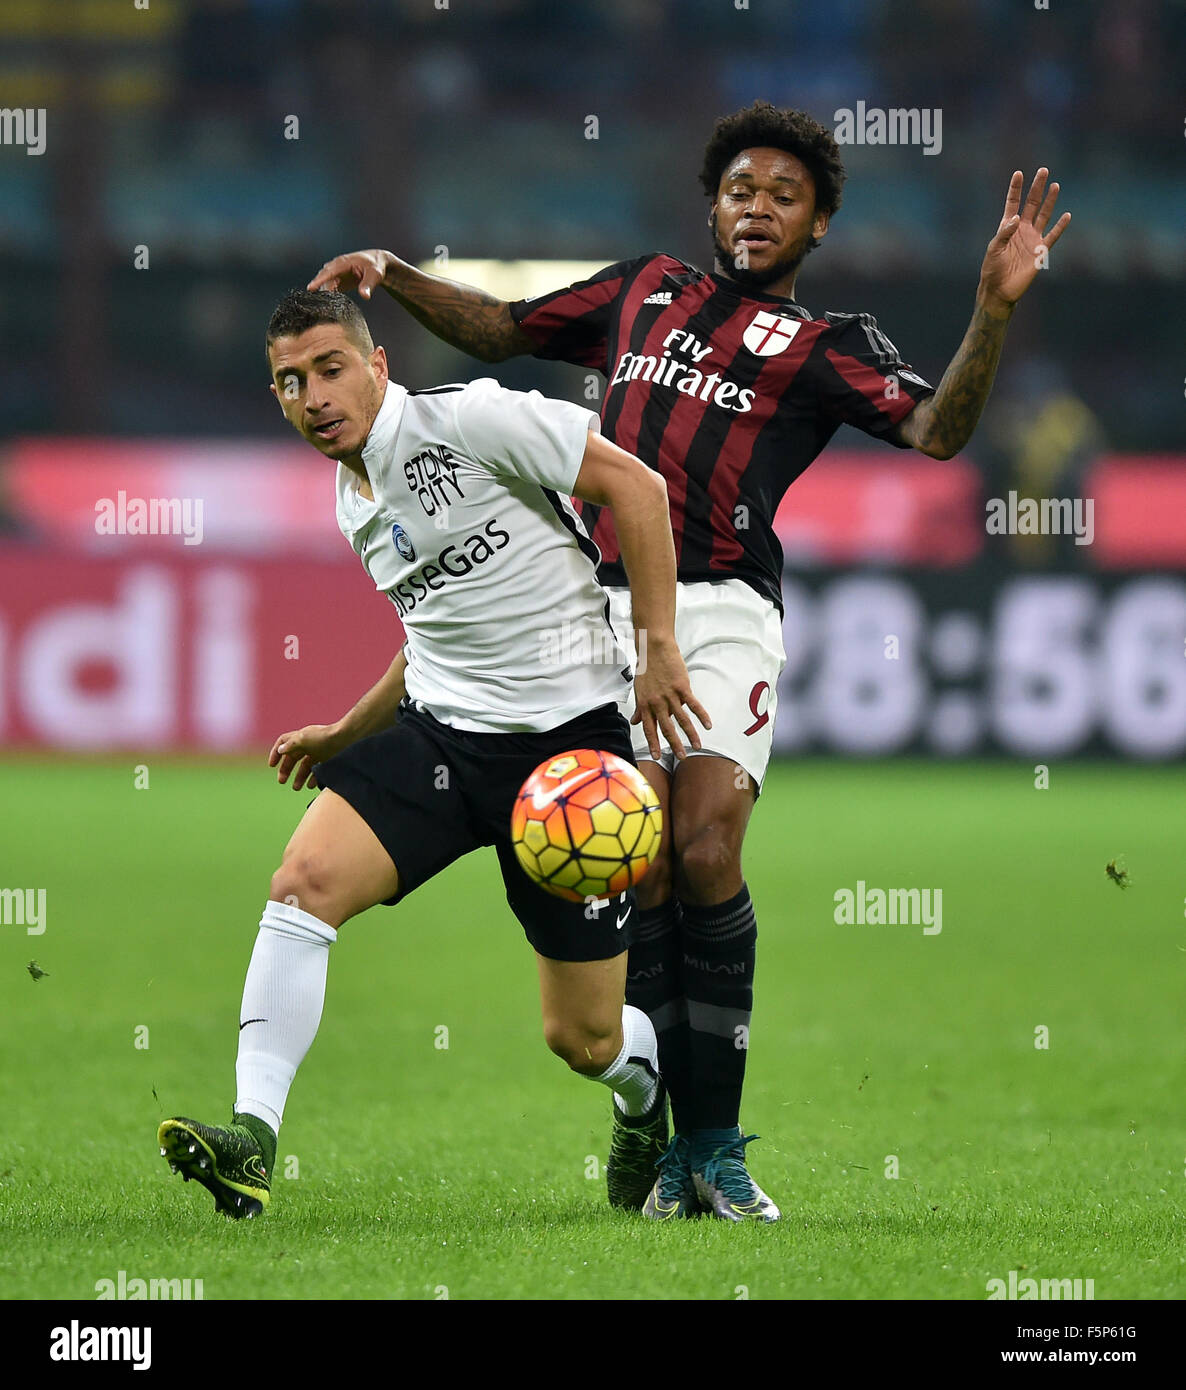 Milano, Italy. 7th Nov, 2015. Luiz Adriano (R) of AC Milan vies with Carlos Carmona of Atalanta during their 2015-16 season Serie A match in Milano, Italy, on Nov. 7, 2015. The match ended with 0-0 draw. Credit:  Alberto Lingria/Xinhua/Alamy Live News Stock Photo